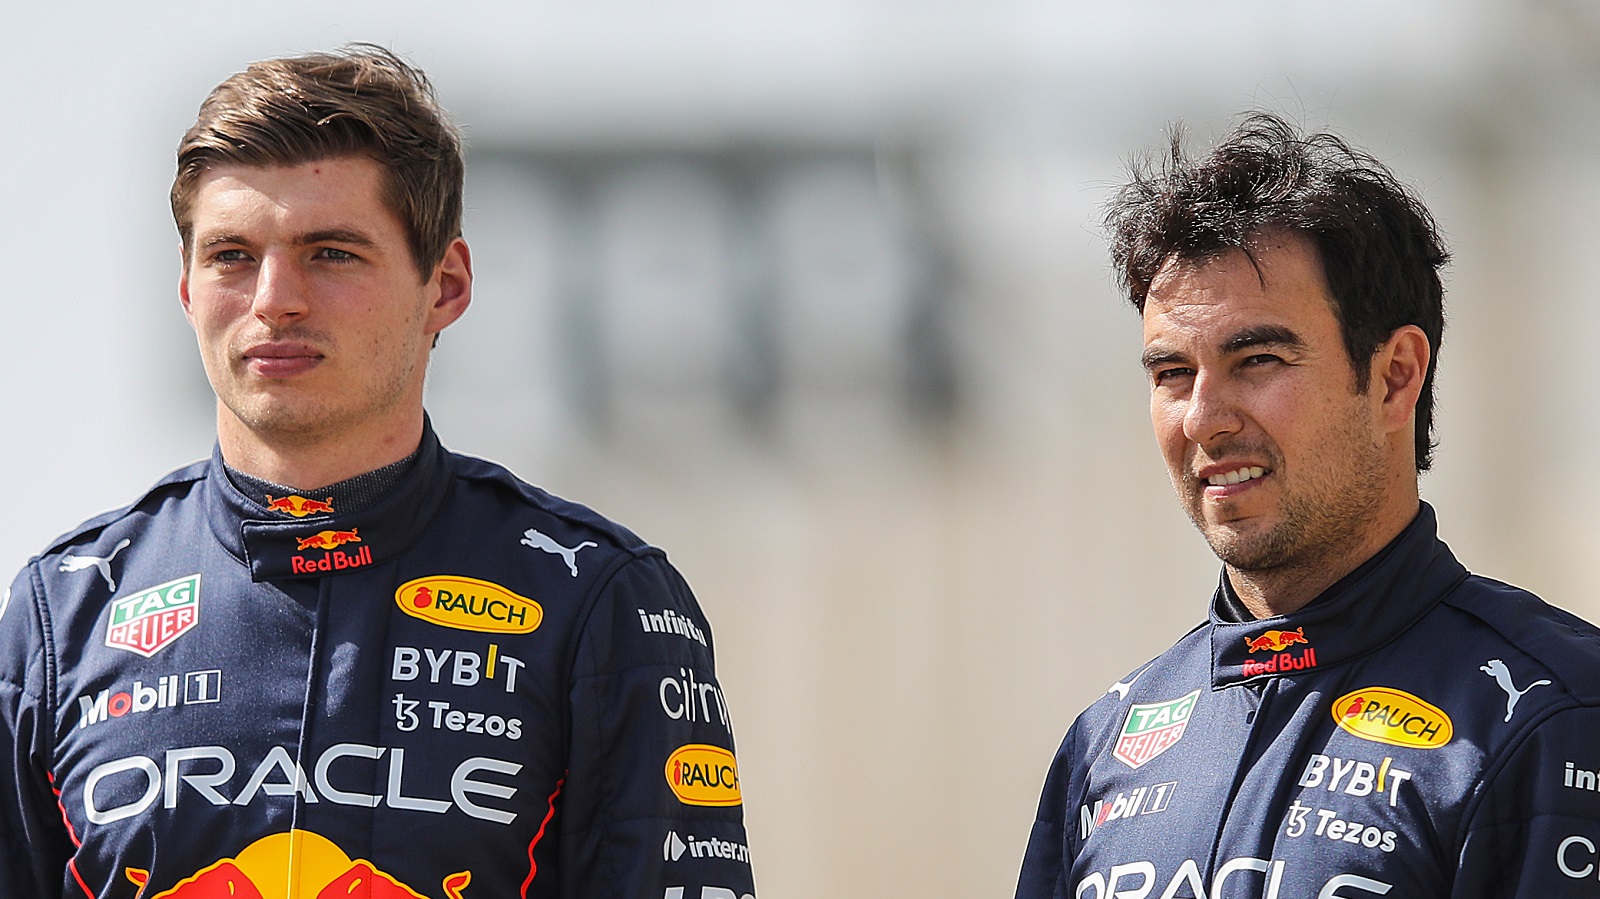 Max Verstappen of the Netherlands and Sergio Perez of Mexico pose for a photo during Formula 1 testing at Bahrain International Circuit on March 10, 2022. | Mark Thompson - Formula 1/Formula 1 via Getty Images